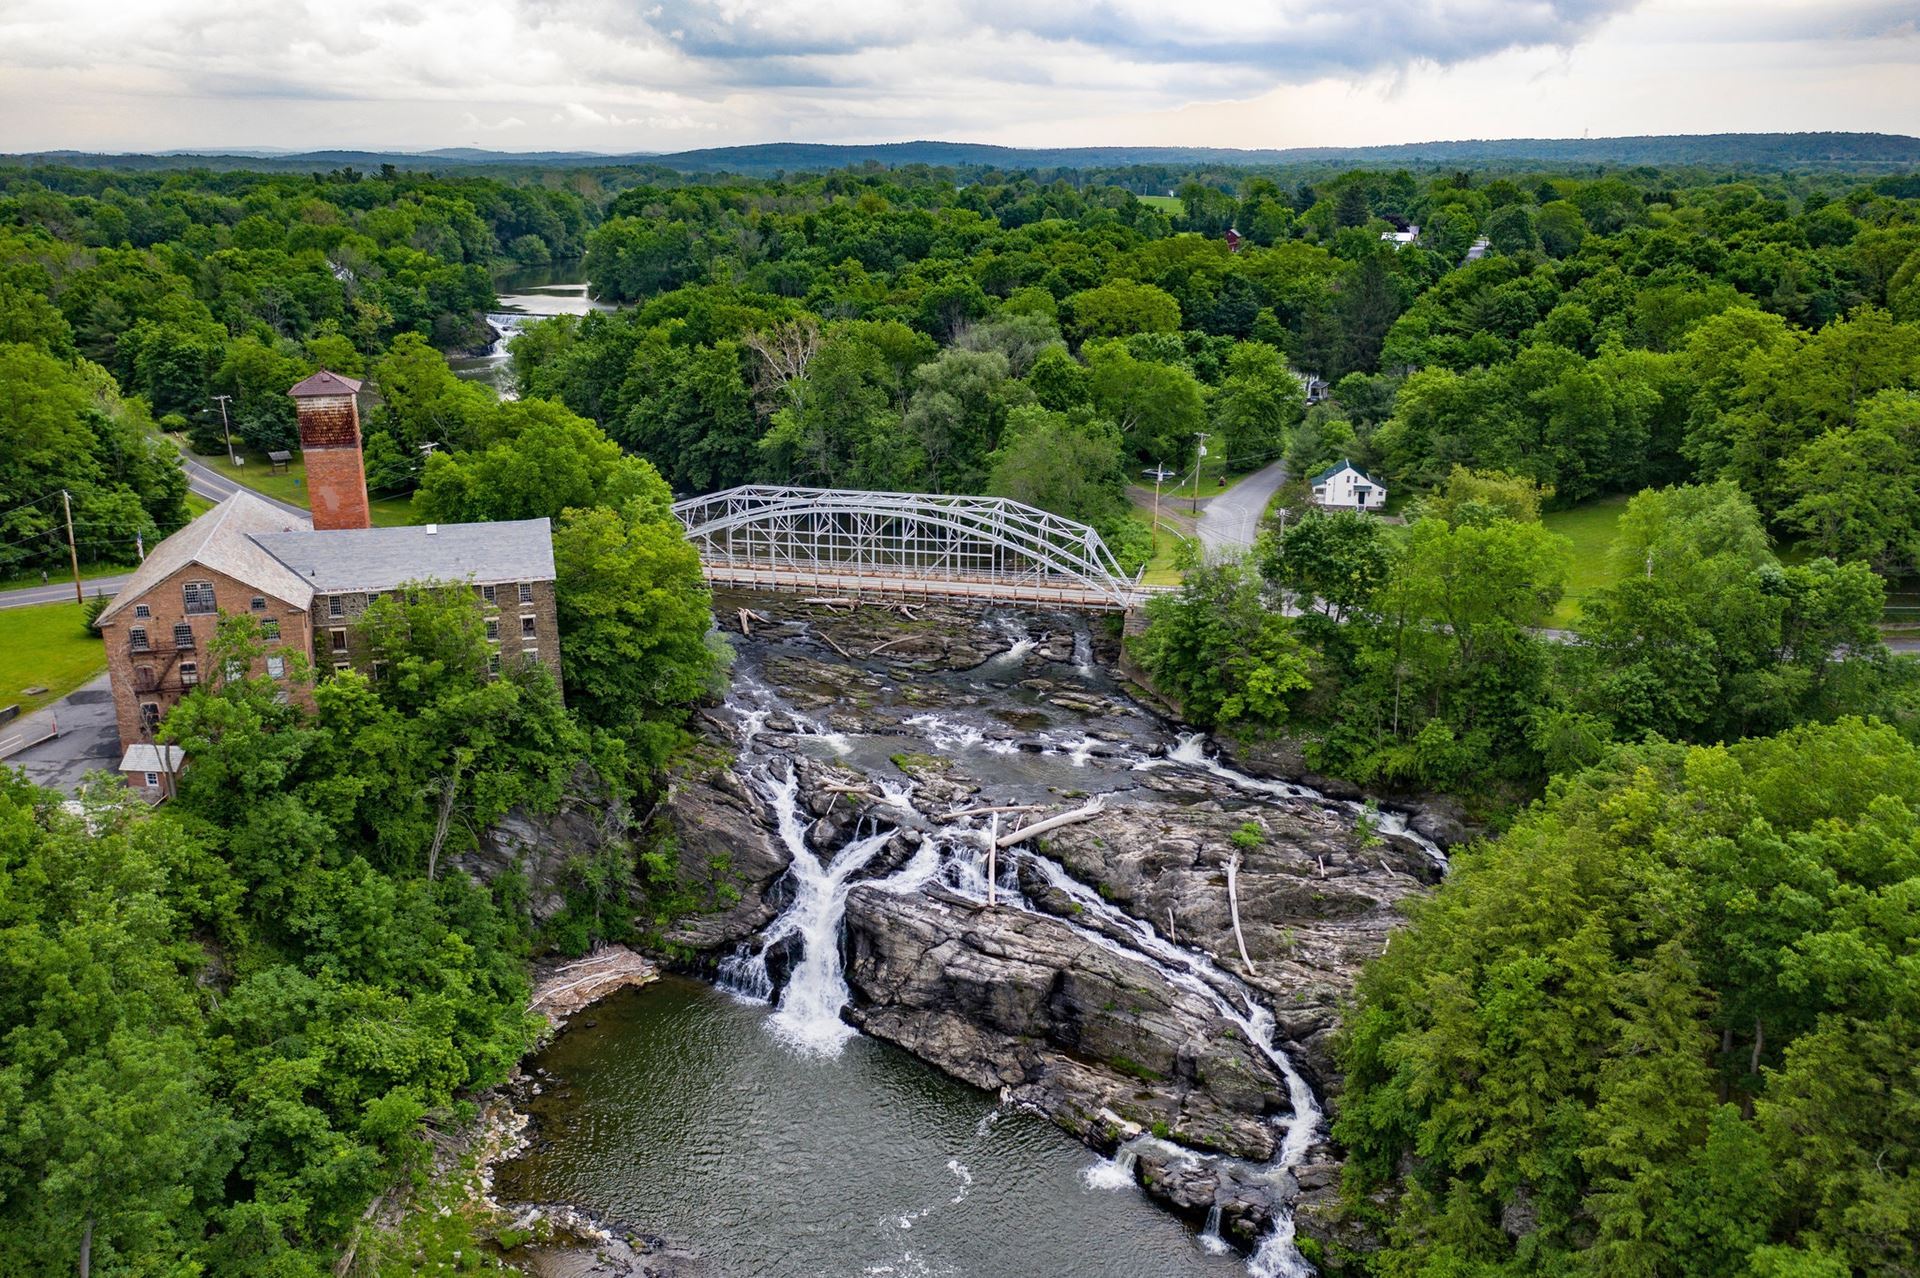 Aerial of a river and waterfall with a steel bridge and brick building. Mountains can be seen in the background